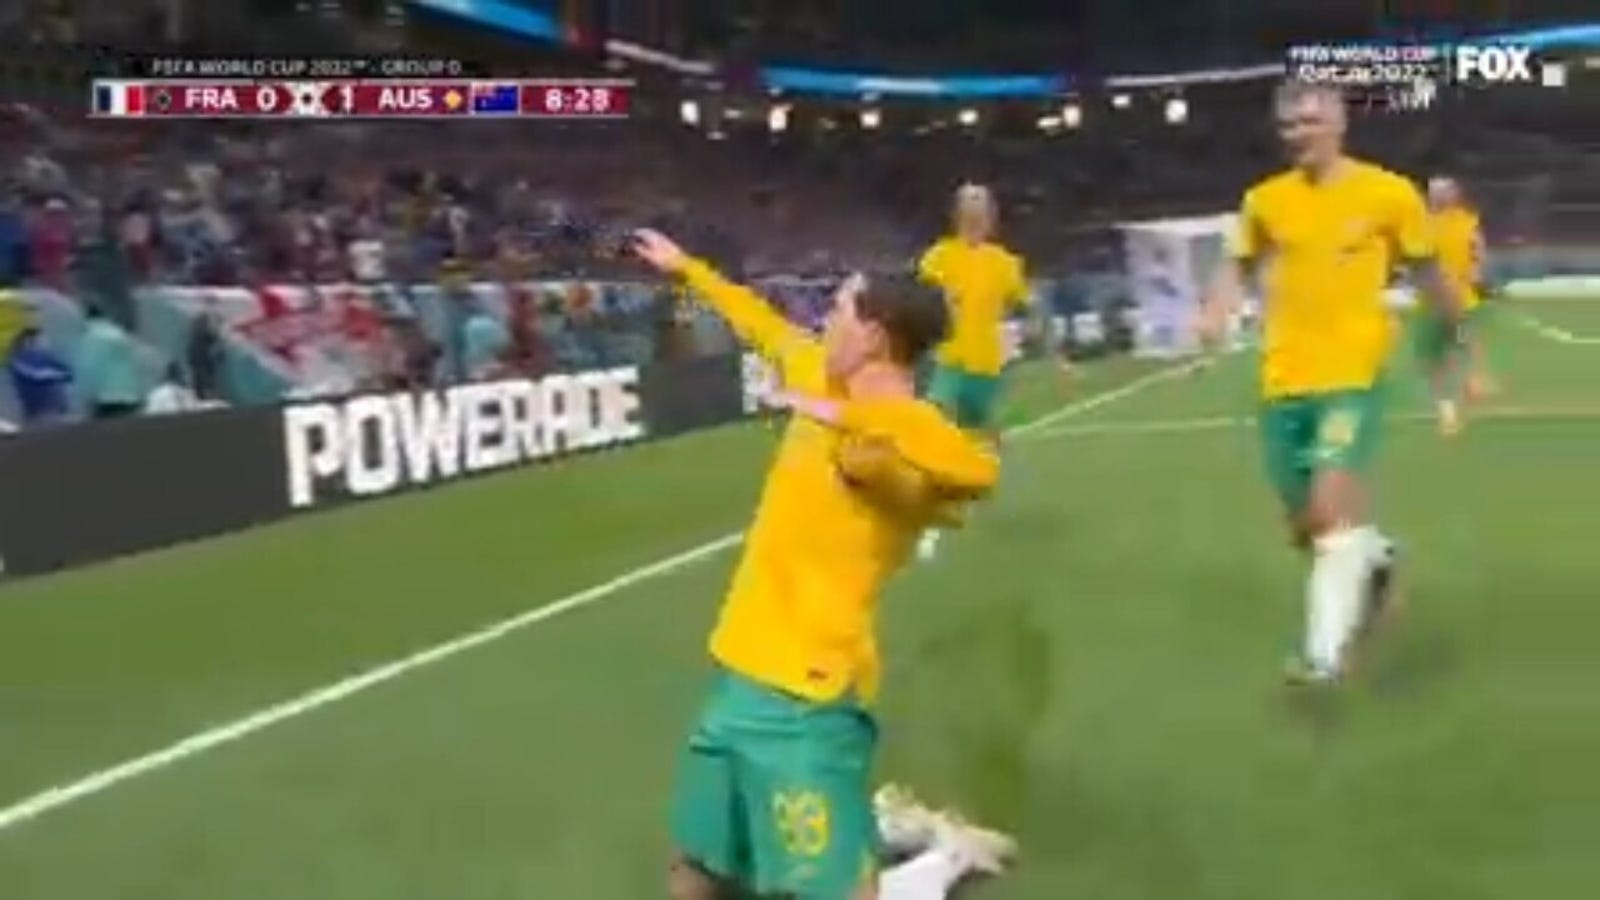 Craig Goodwin scored the first goal in the ninth minute, giving Australia a 1–0 lead over France 